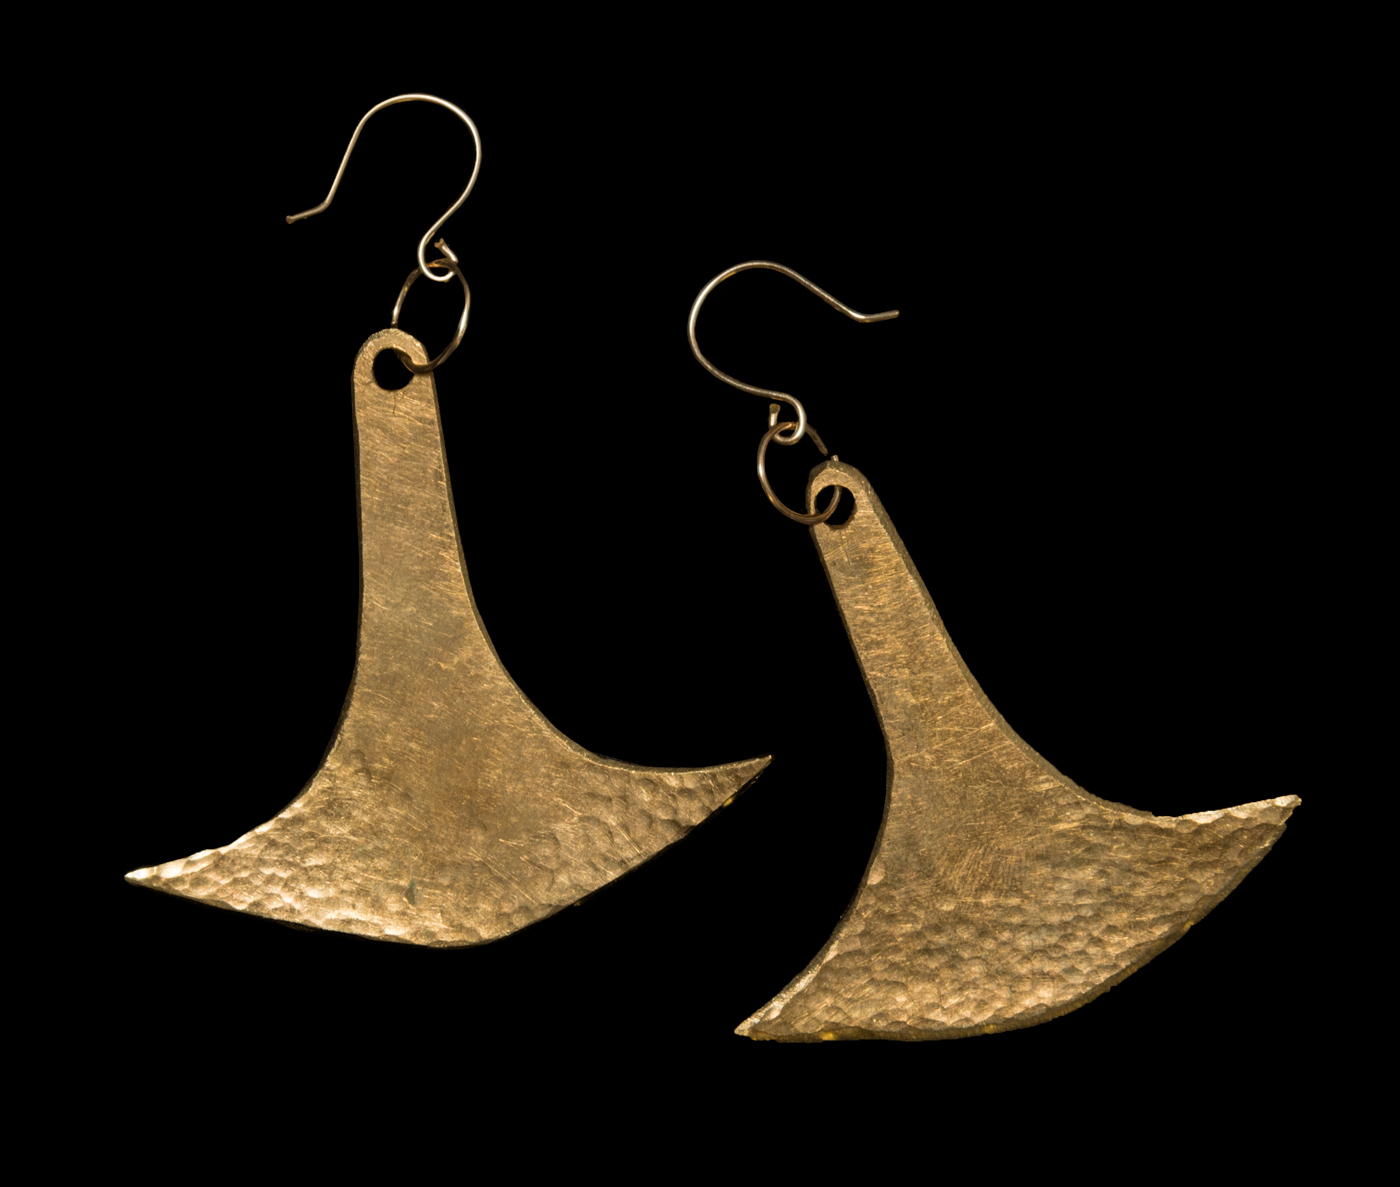 two gold colored earrings. They are similar to the shape of an anchor and have a hammered detail near the bottom